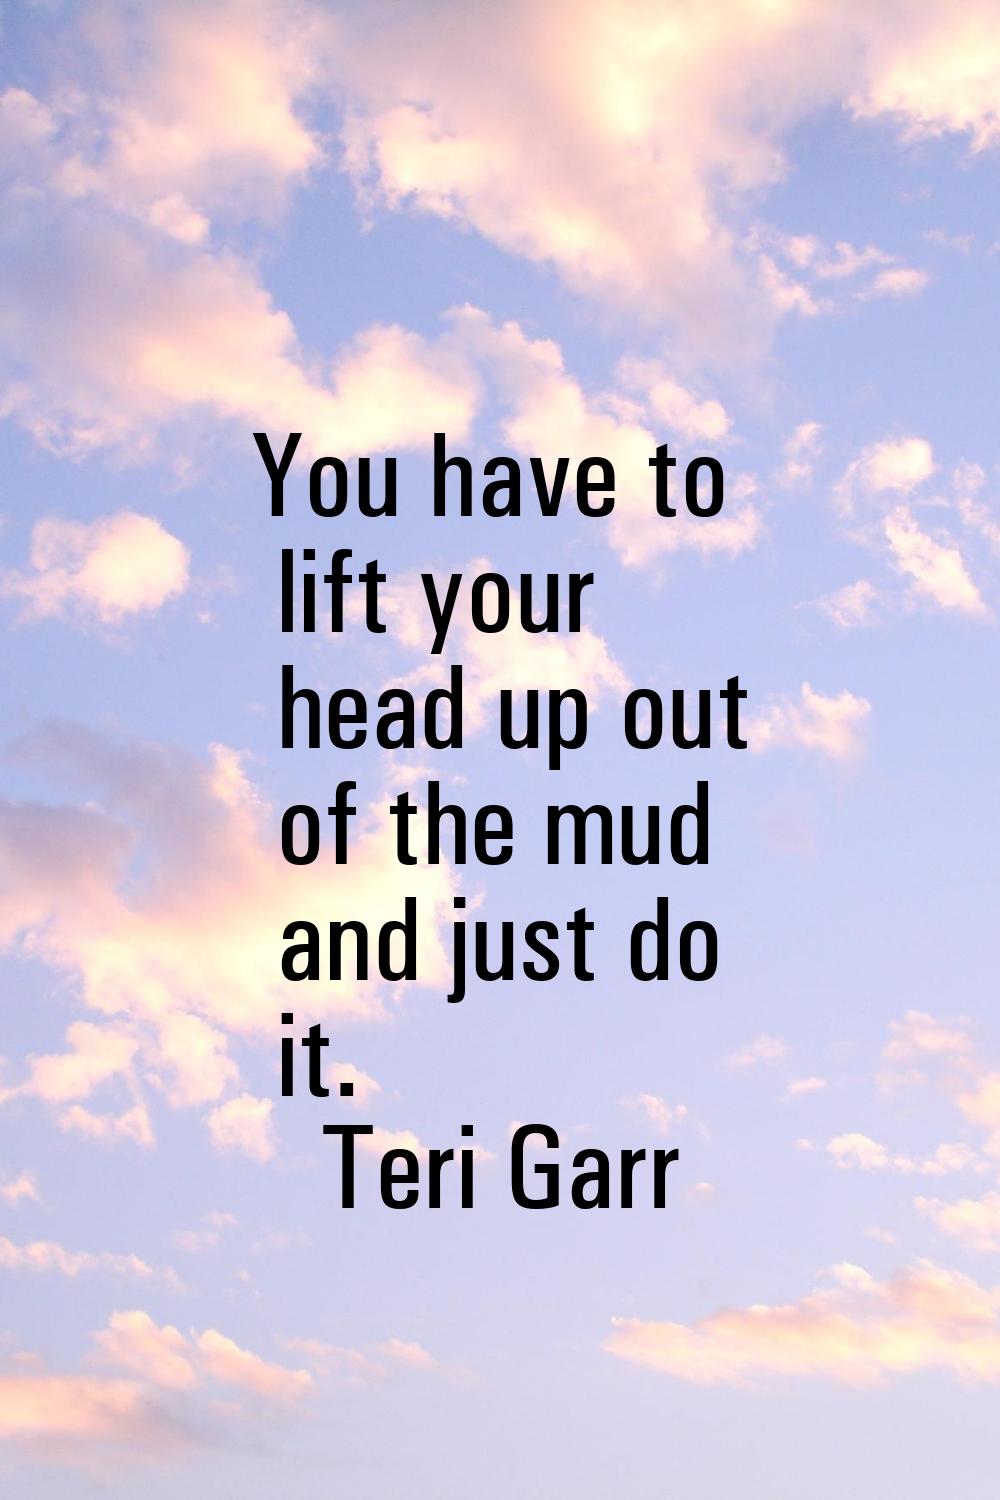 You have to lift your head up out of the mud and just do it.